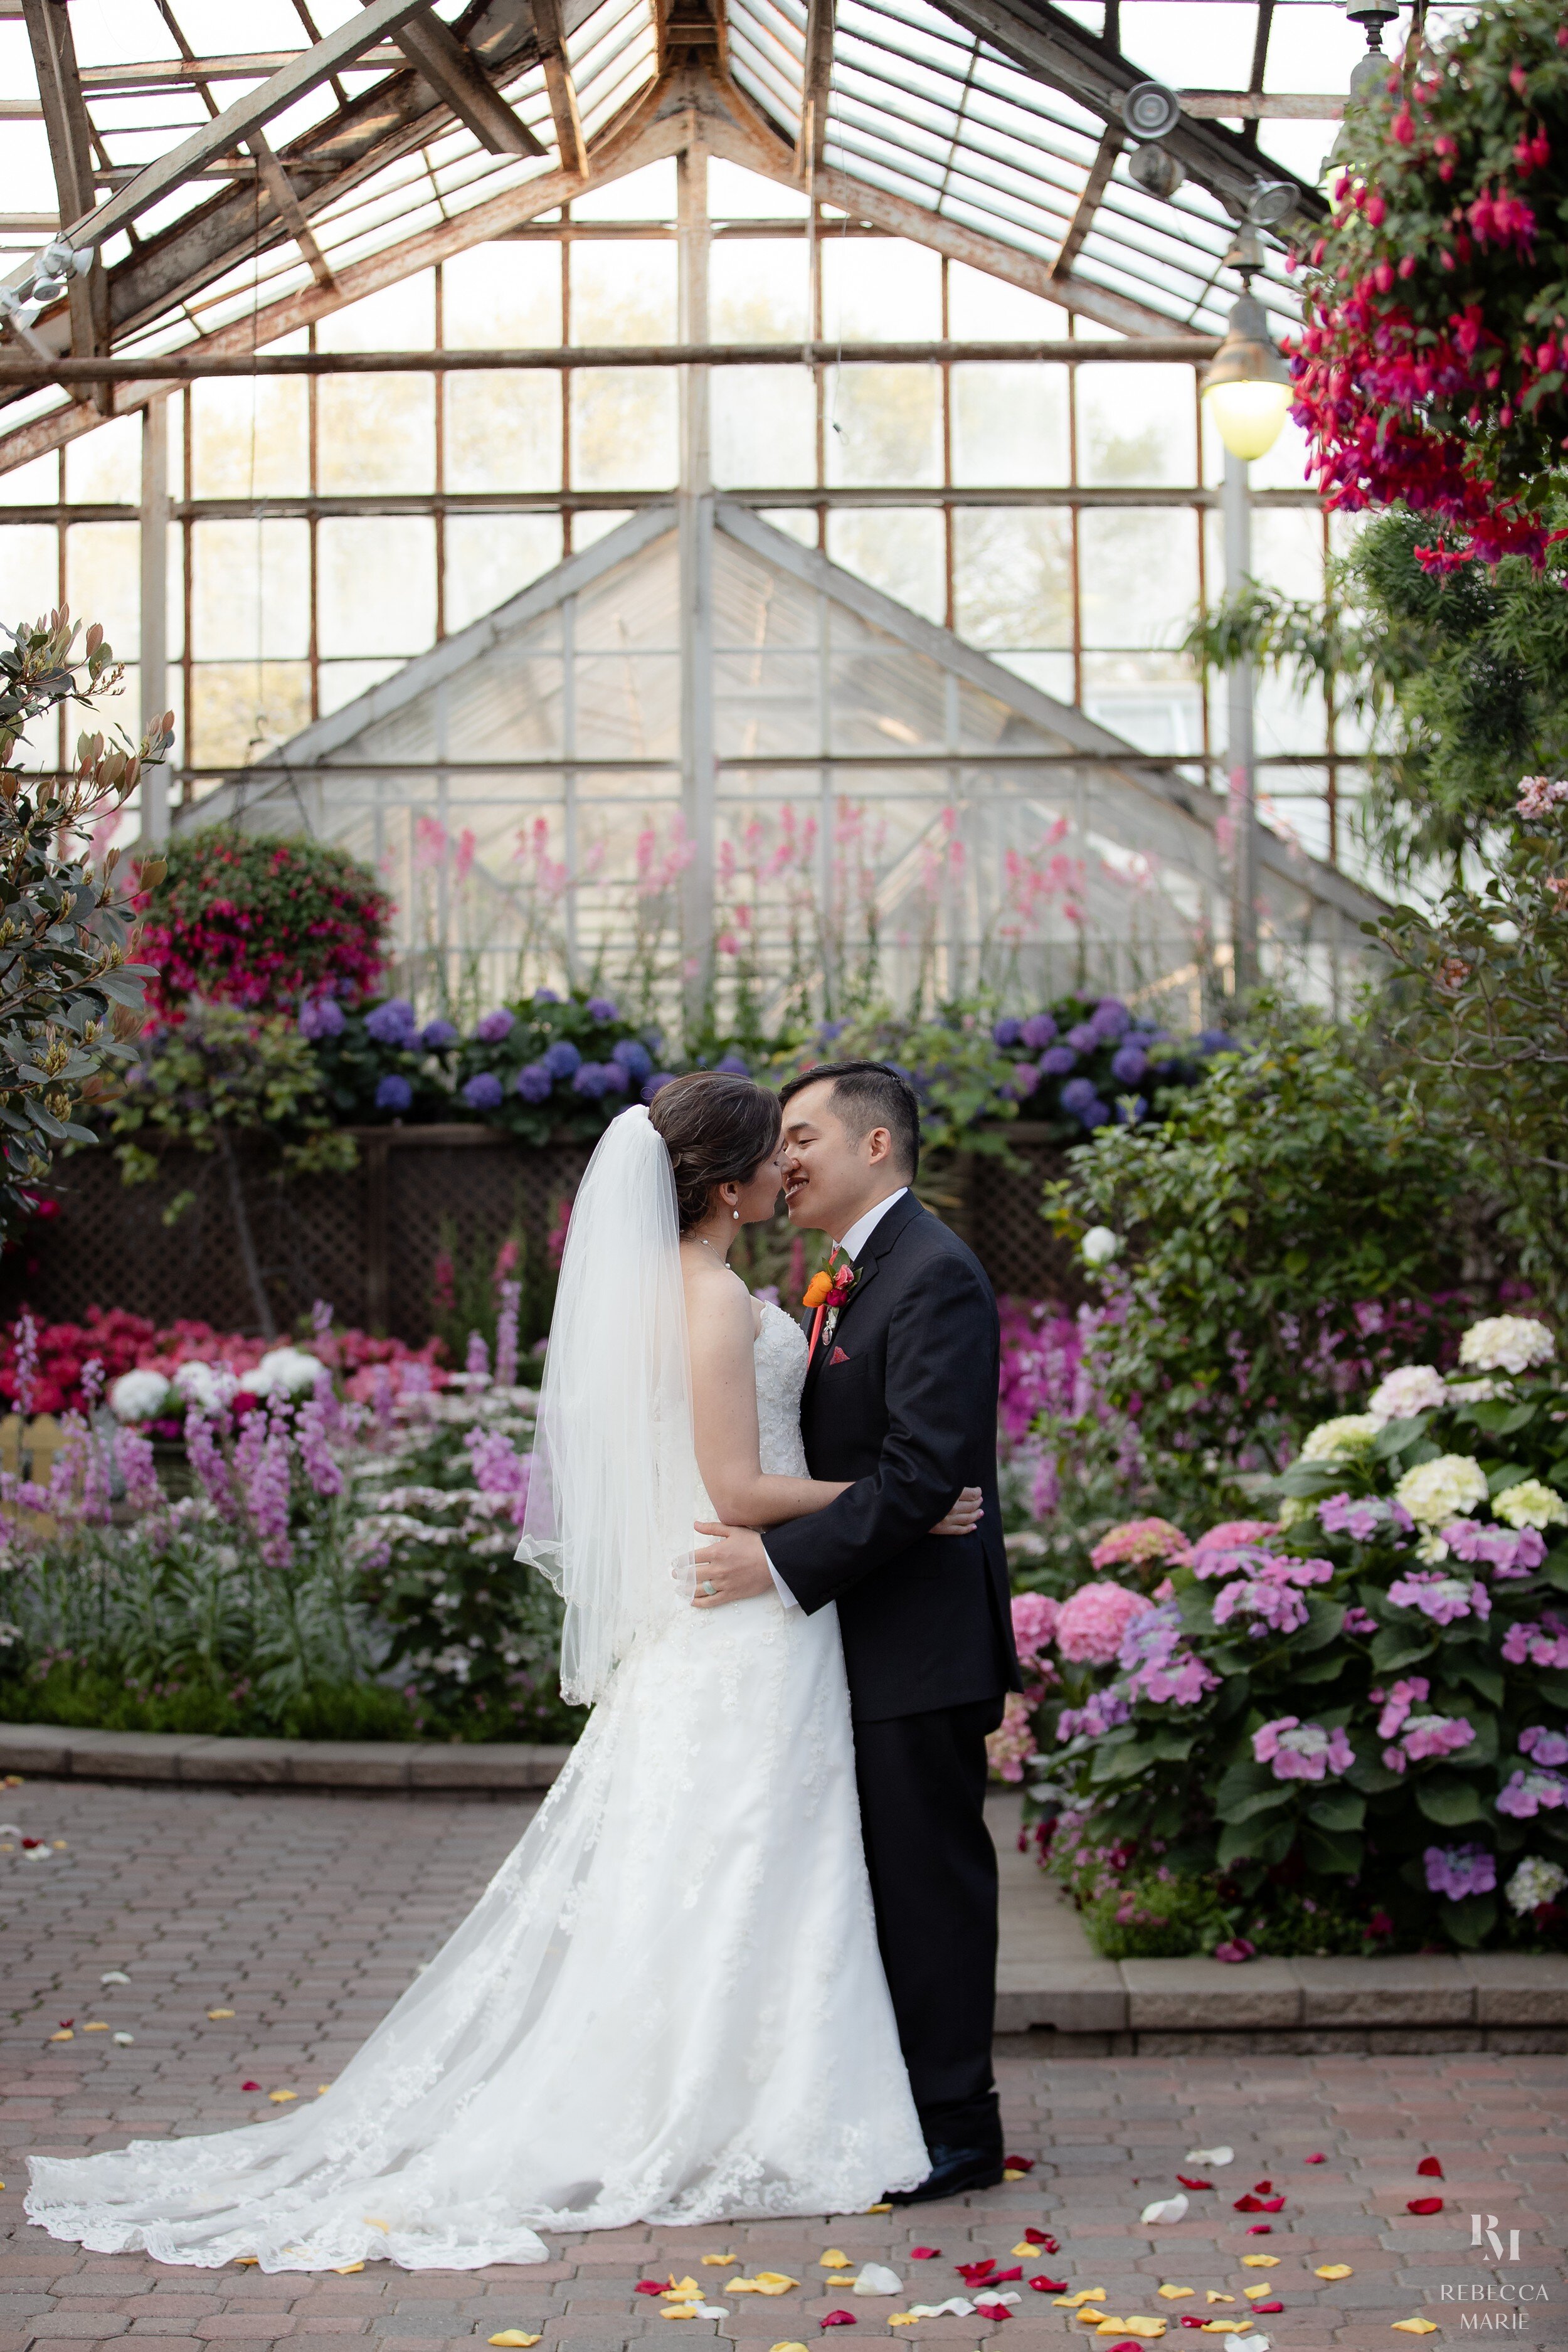 Lincoln-Park-Conservatory-Real-Wedding-Rebecca-Marie-Photography_0025.jpg